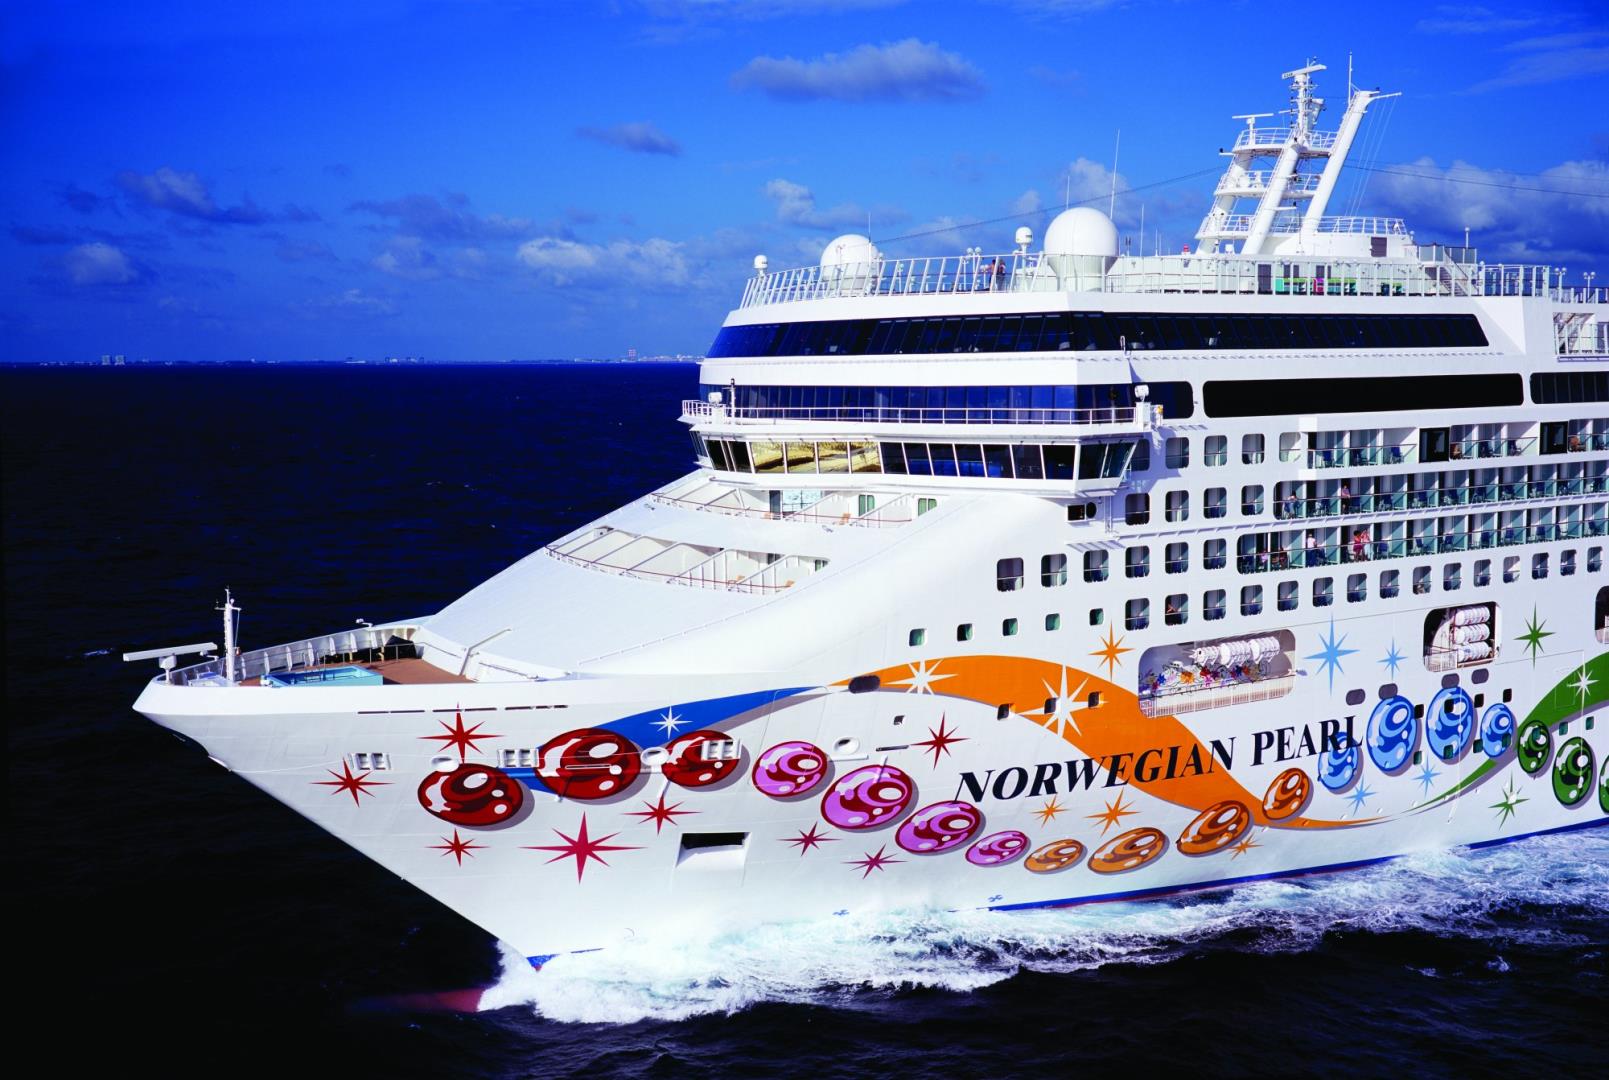 9-day Cruise to Caribbean: Puerto Rico, Great Stirrup Cay & Dominican Republic from Miami, Florida on Norwegian Pearl